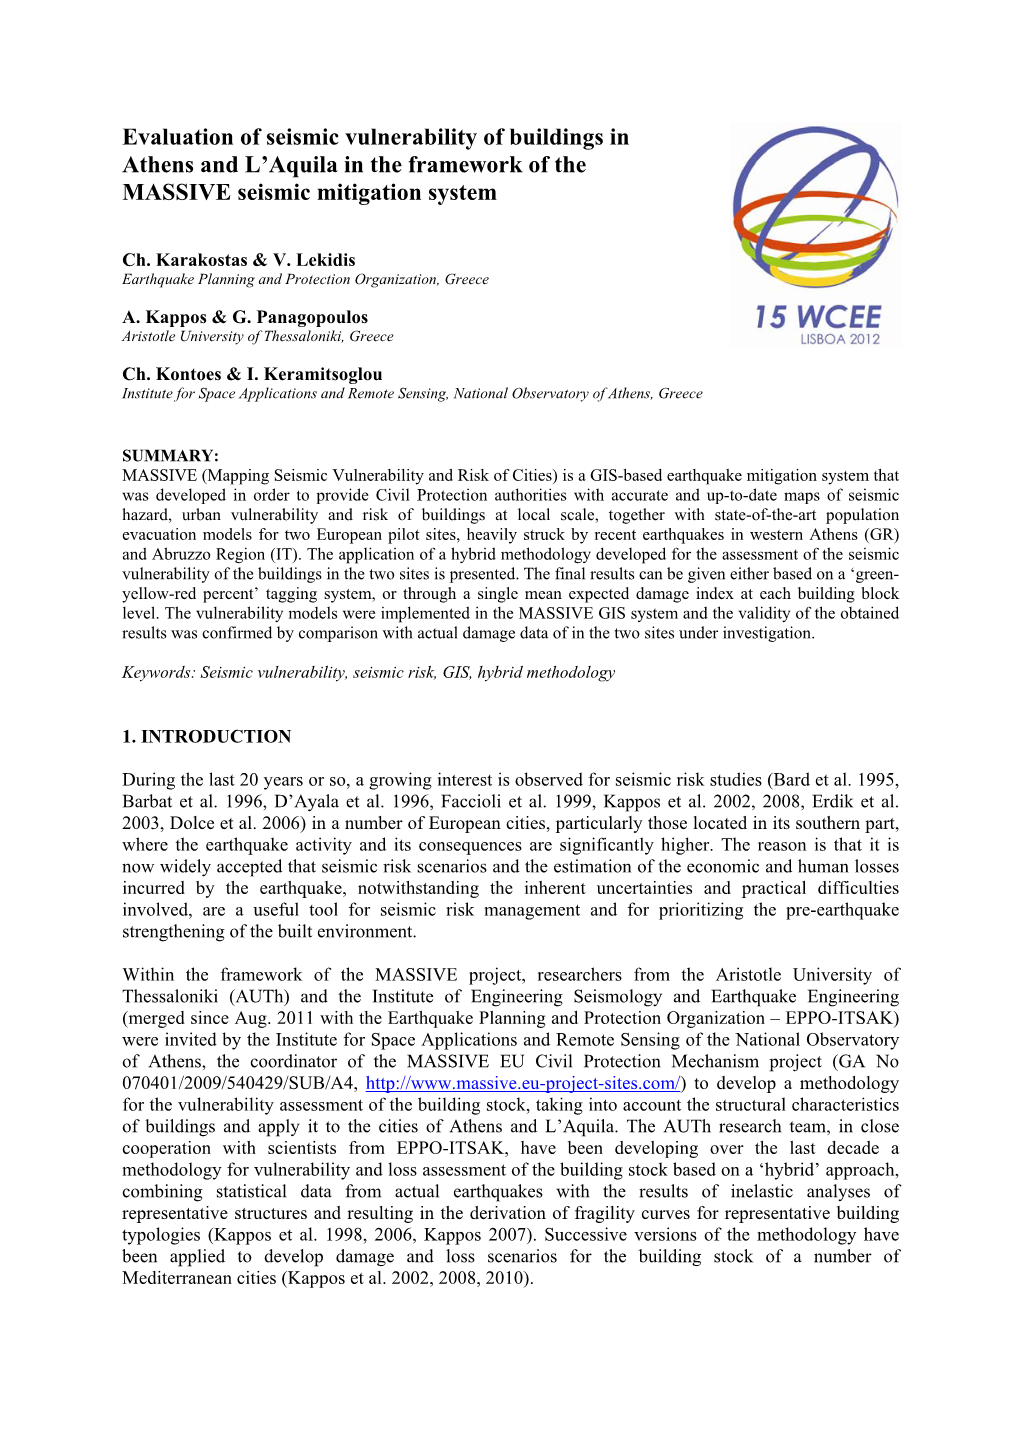 Evaluation of Seismic Vulnerability of Buildings in Athens and L'aquila In